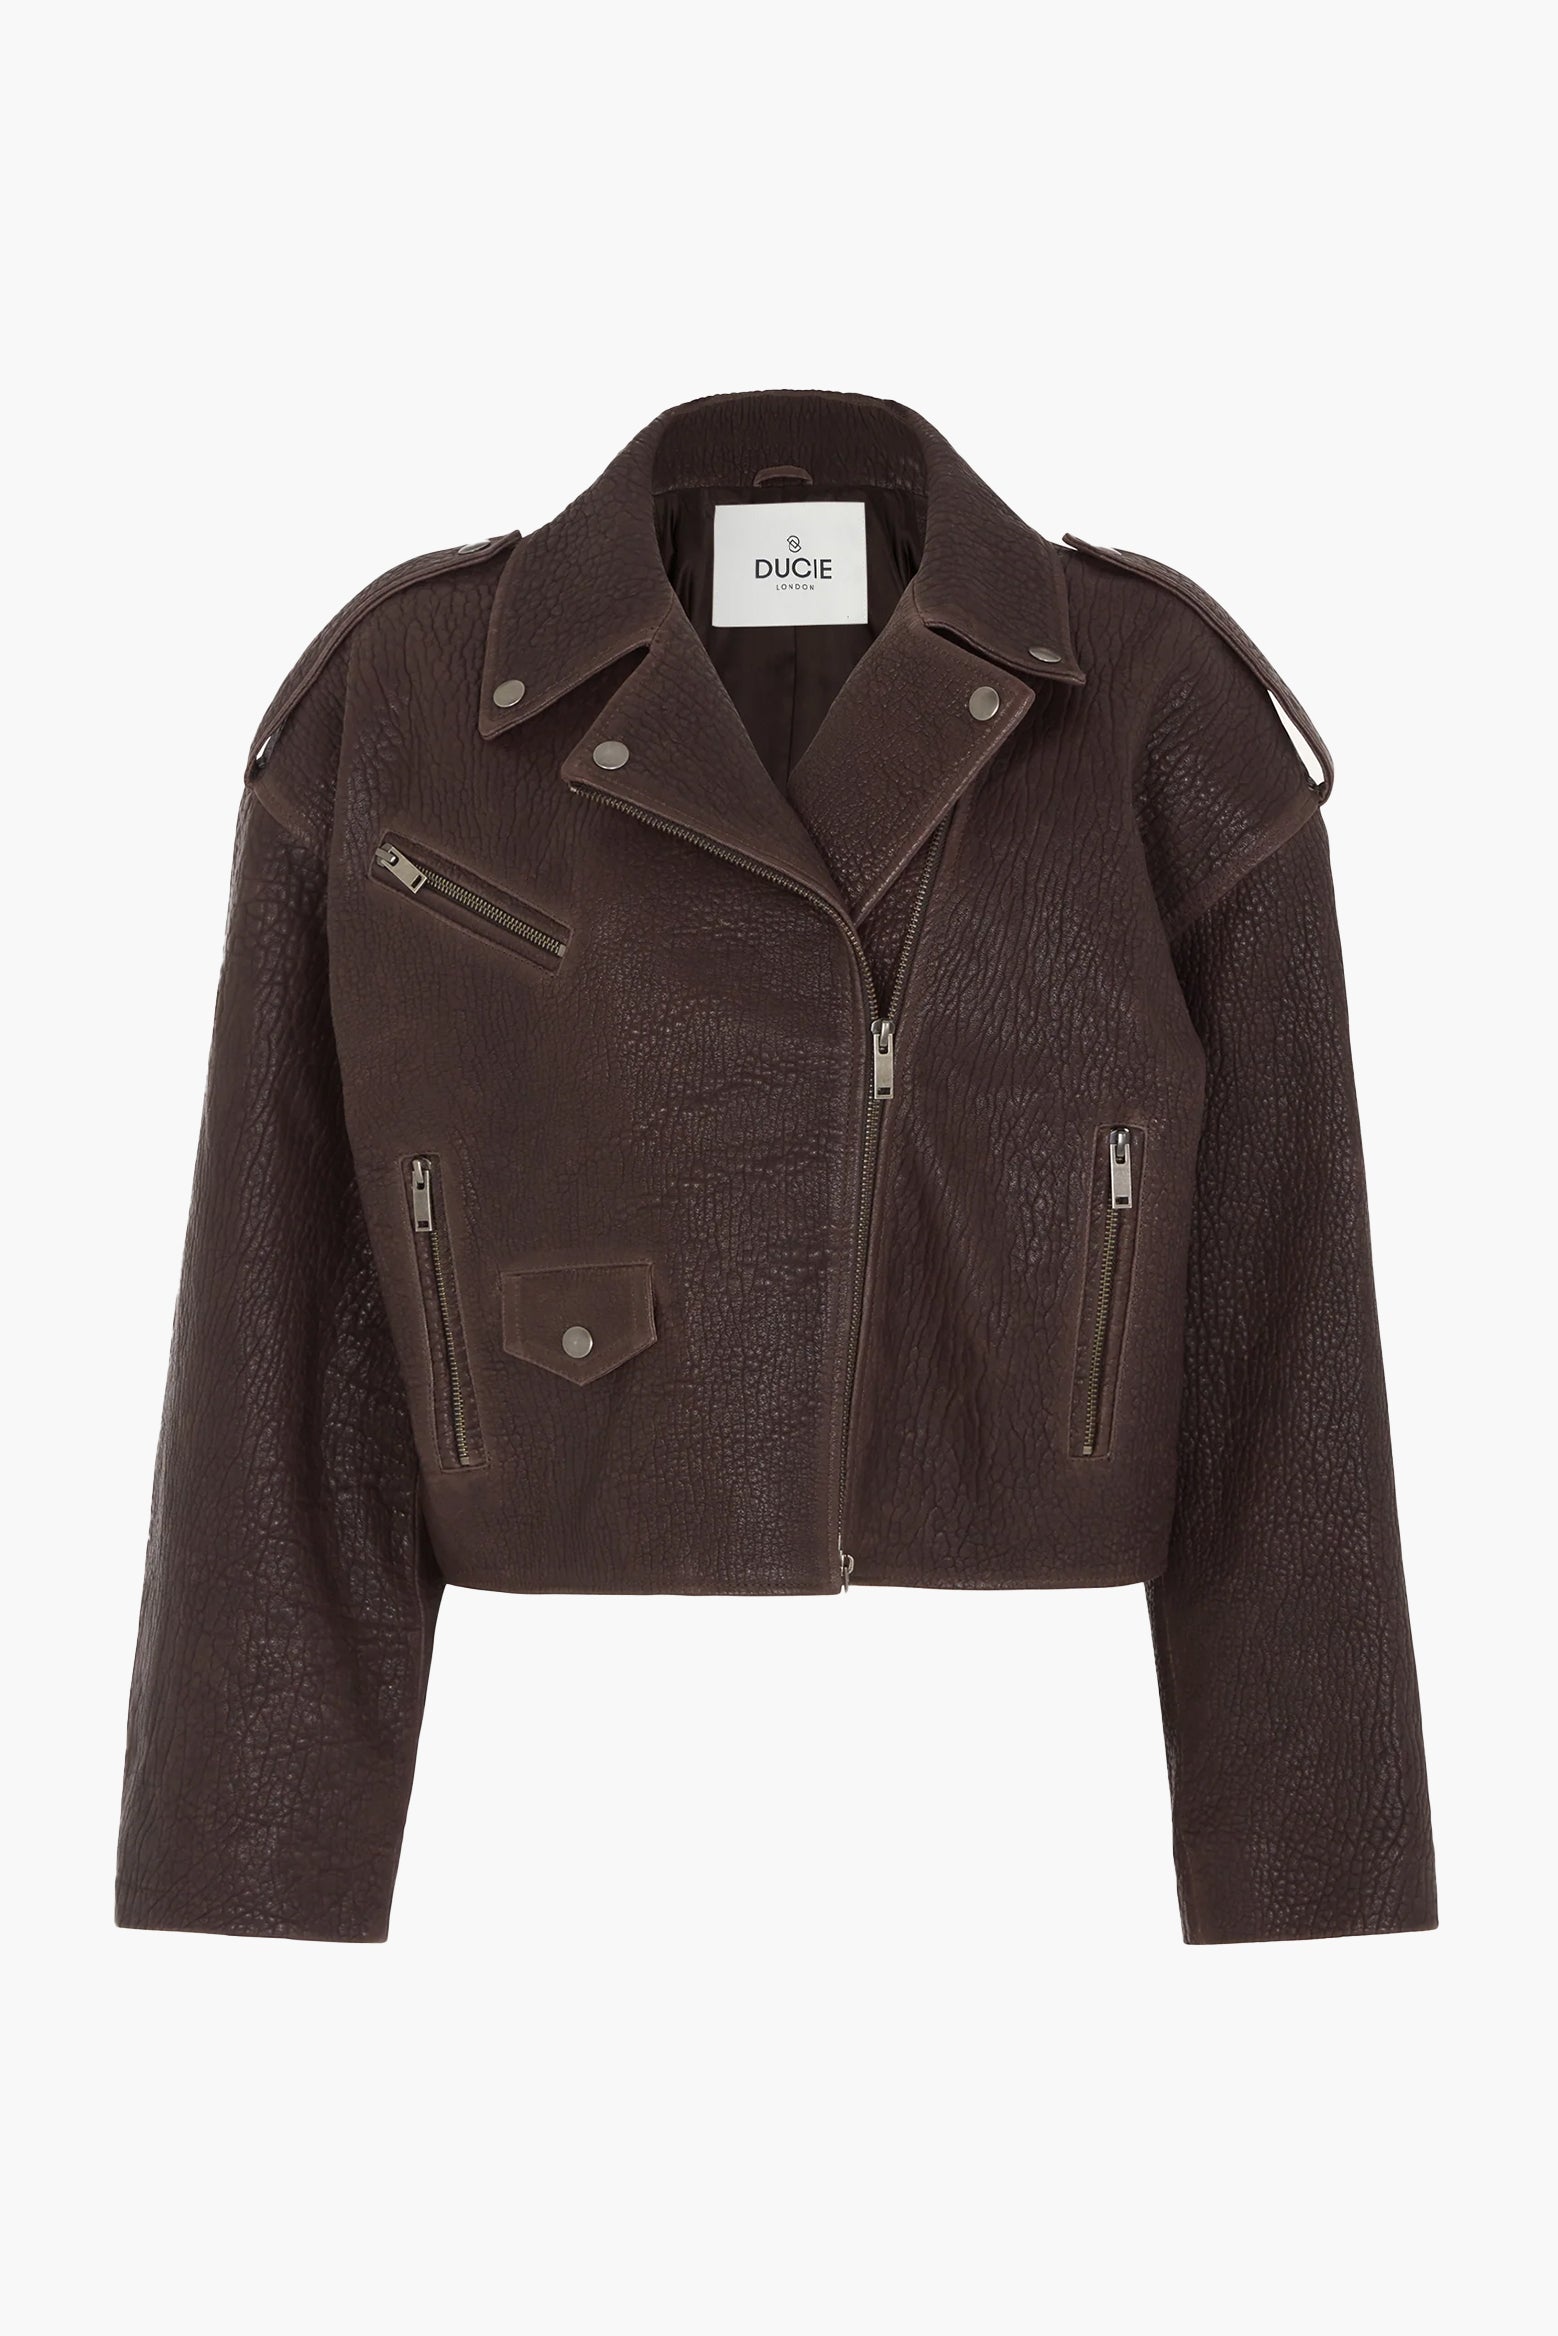 DUCIE LONDON Ophelia Leather Biker Jacket in Bitter Chocolate available at The New Trend